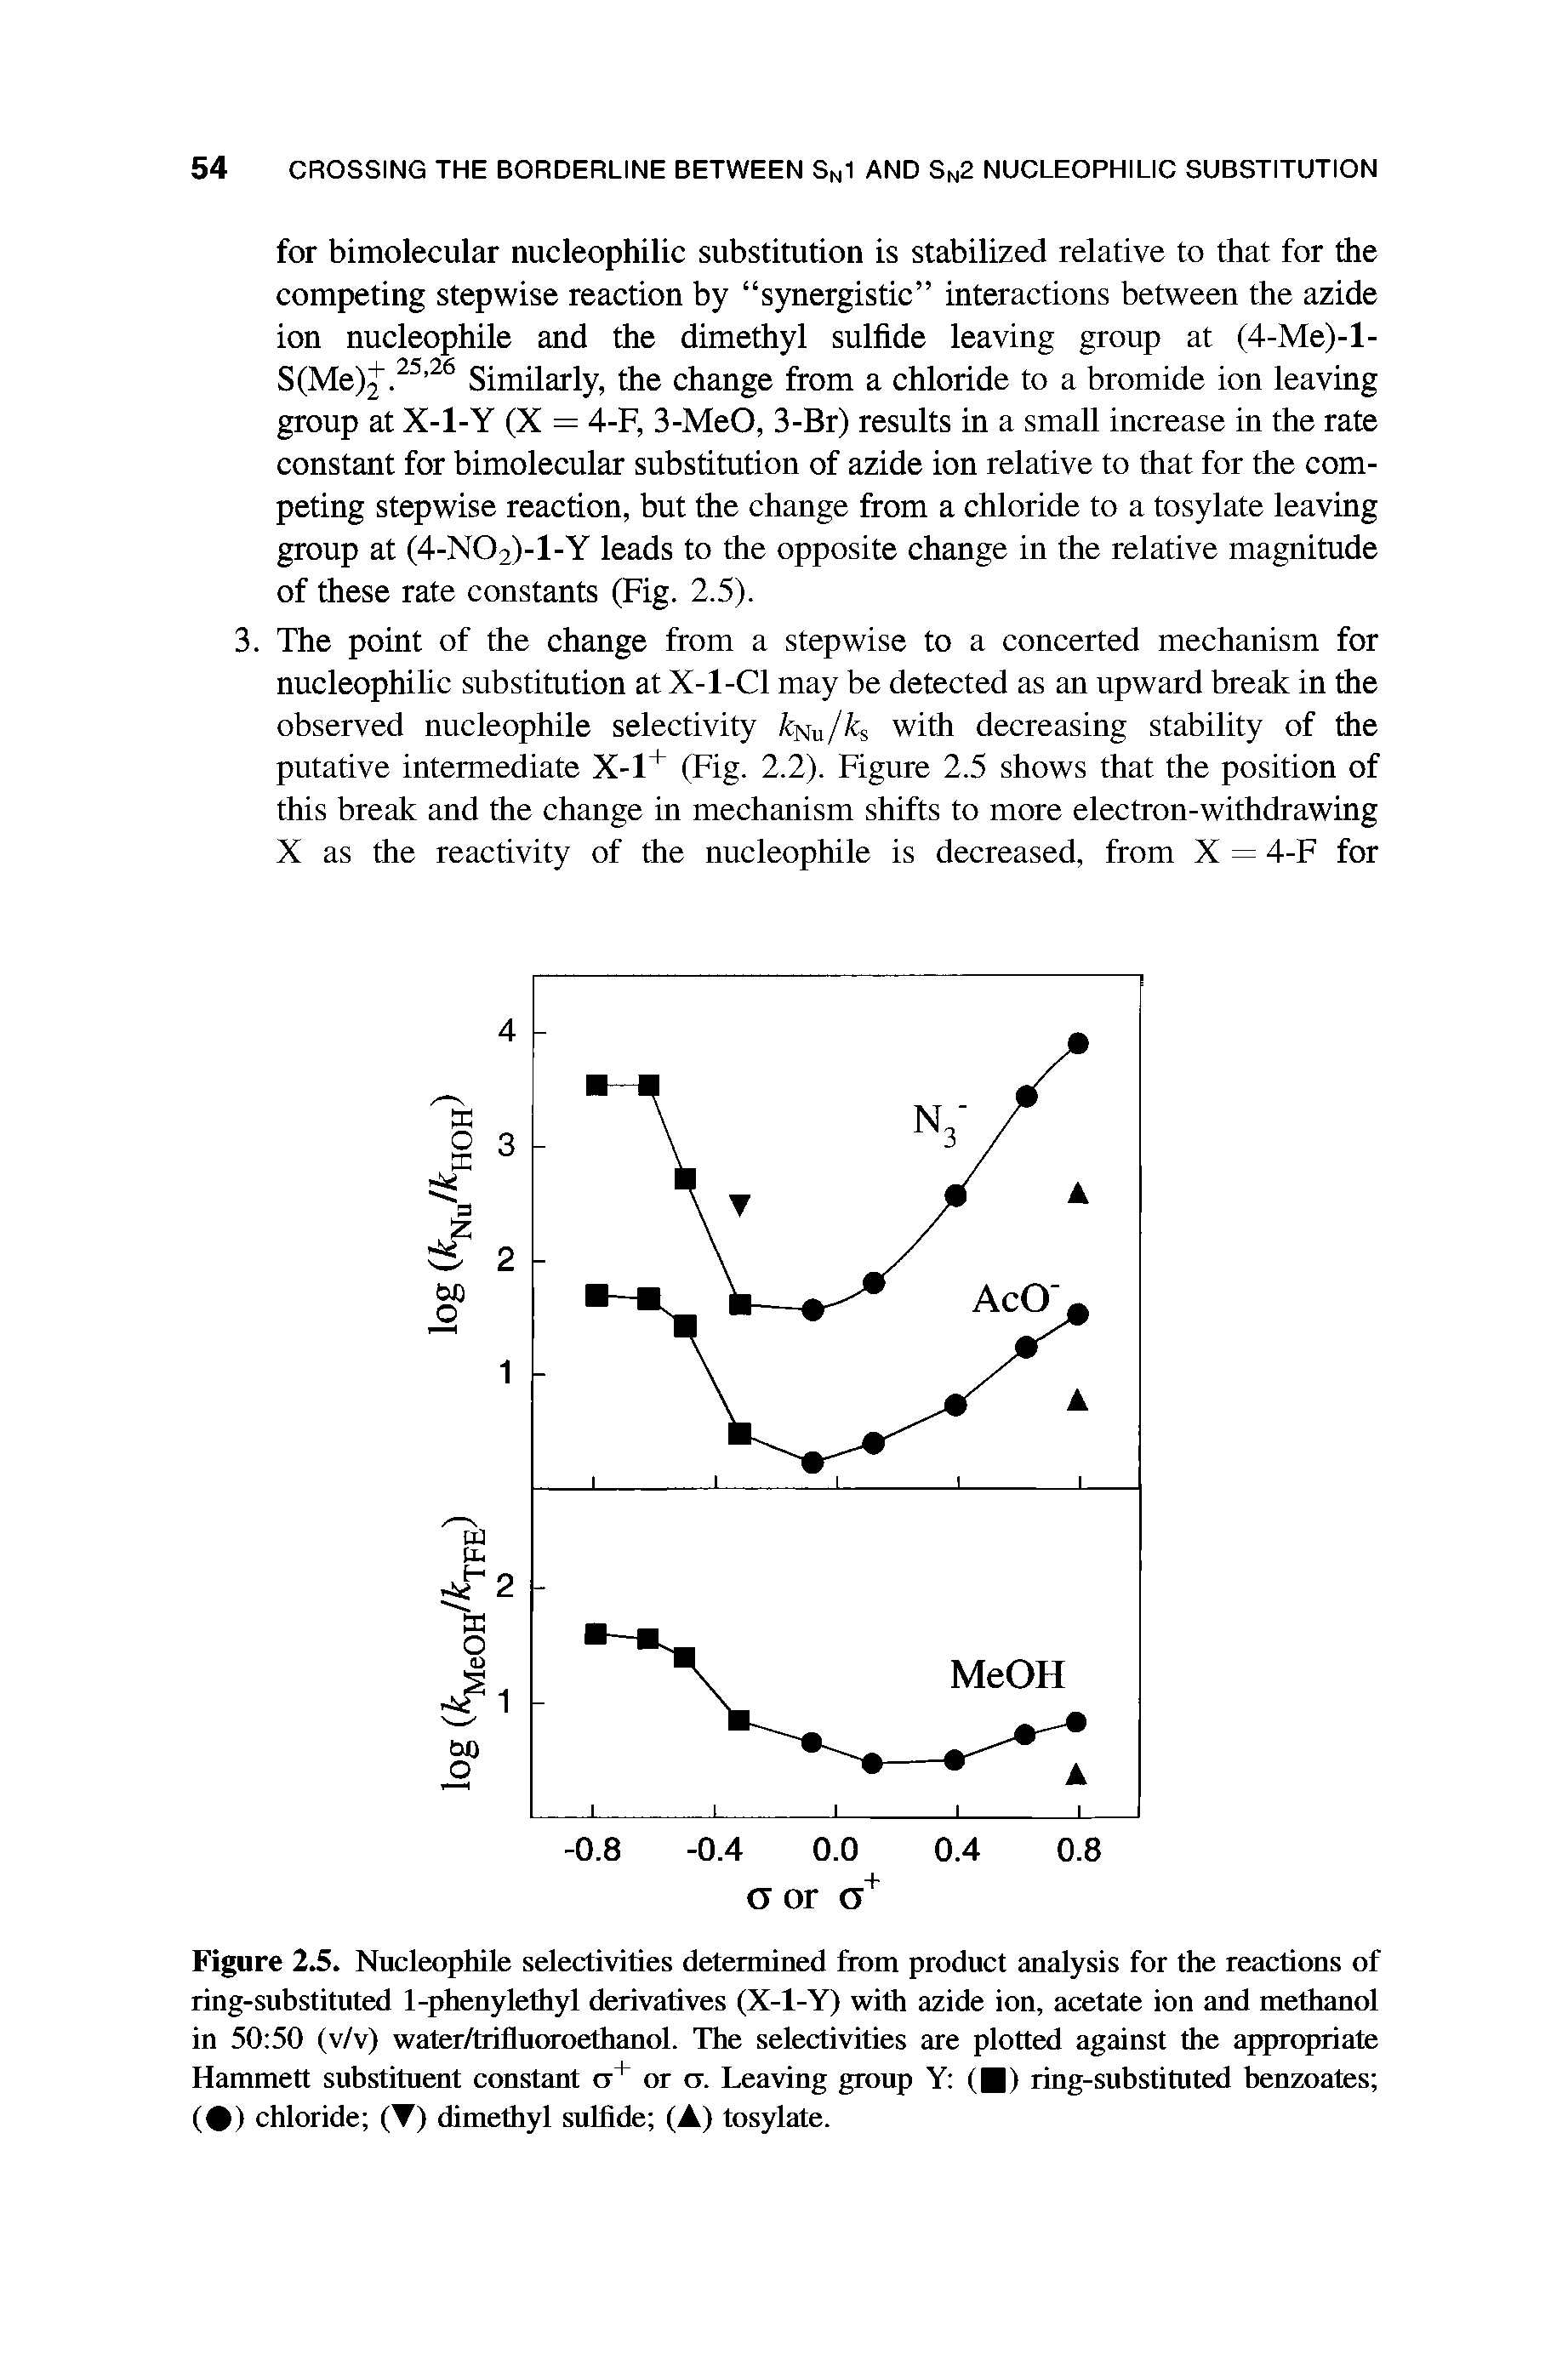 Figure 2.5. Nucleophile selectivities determined from product analysis for the reactions of ring-suhstituted 1-phenylethyl derivatives (X-l-Y) with azide ion, acetate ion and methanol in 50 50 (v/v) water/trifluoroethanol. The selectivities are plotted against the appropriate Hammett substituent constant or a. Leaving group Y ( ) ring-suhstituted benzoates ( ) chloride (T) dimethyl sulfide (A) tosylate.